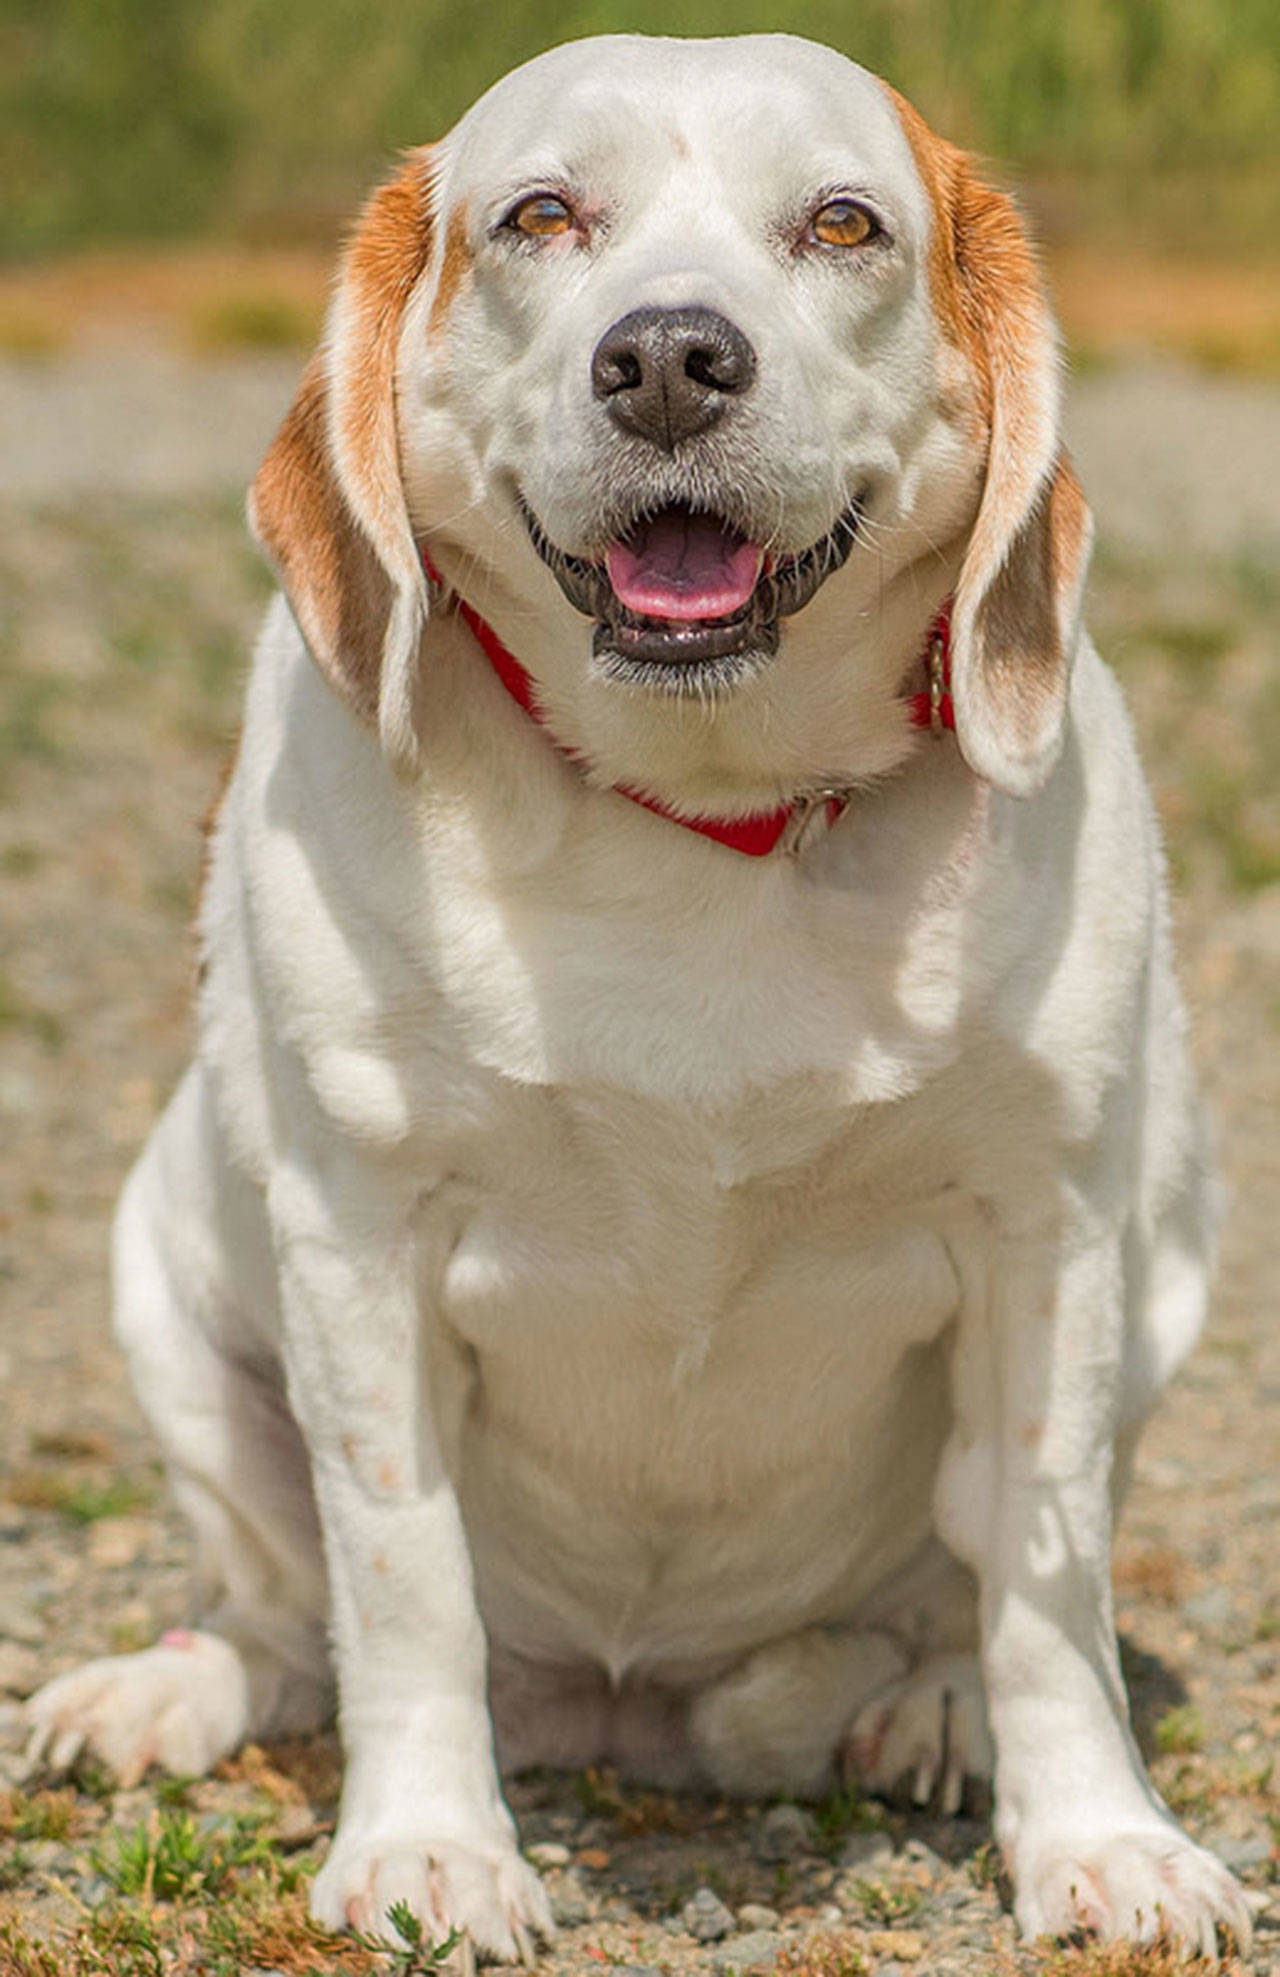 Angels owner has passed away and she is in need of a new home. She gets along well with other dogs and has not lived with cats. Angel is very gentle with children but also needs them to be respectful with her. She is house trained and loves going for short walks. (Curt Story/Everett Animal Shelter)